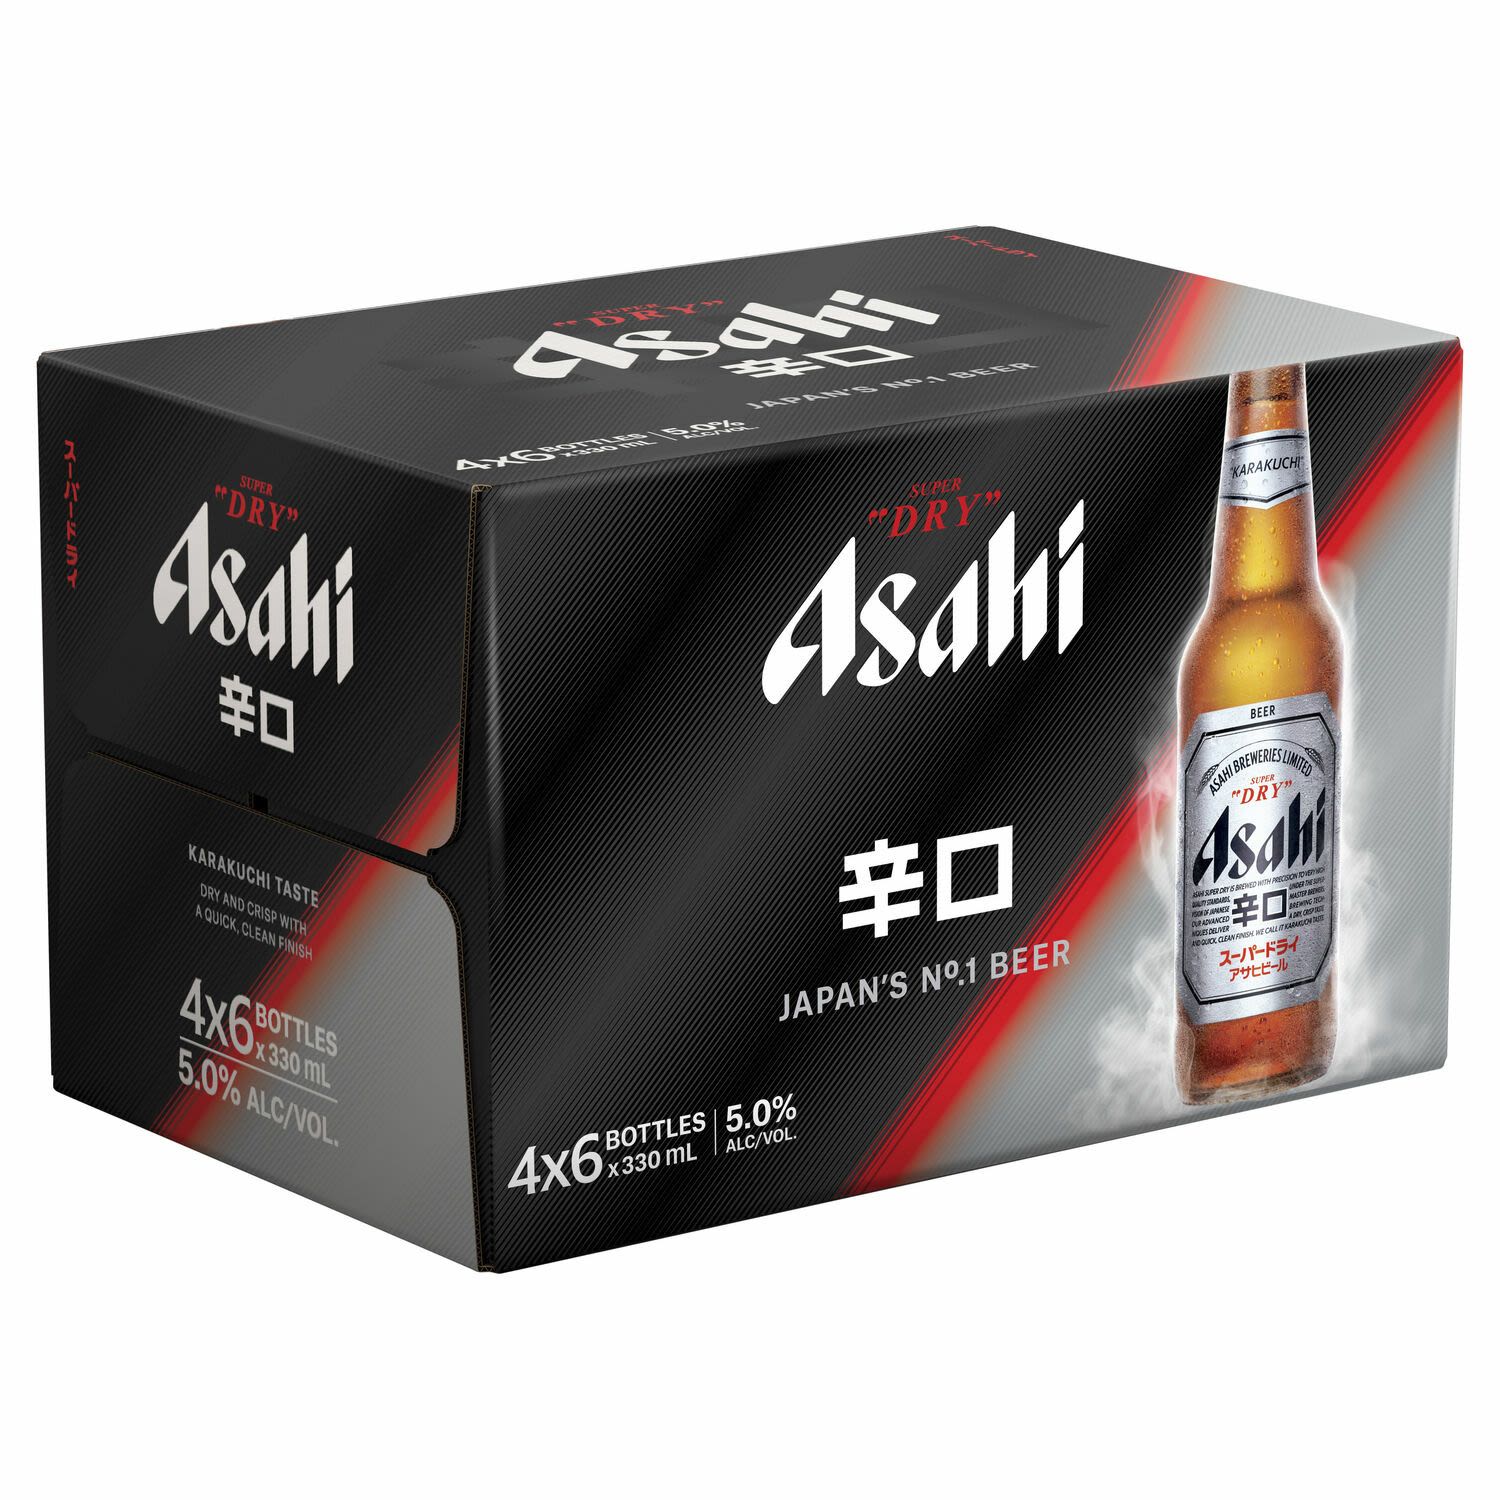 Karakuchi means dry, and it is the word that best describes the sophisticated yet congenial character of ASAHI SUPER DRY. Its refreshingly crisp, clear taste makes it an excellent match for any cuisine.<br /> <br />Alcohol Volume: 5.00%<br /><br />Pack Format: 24 Pack<br /><br />Standard Drinks: 1.3</br /><br />Pack Type: Bottle<br /><br />Country of Origin: Japan<br />